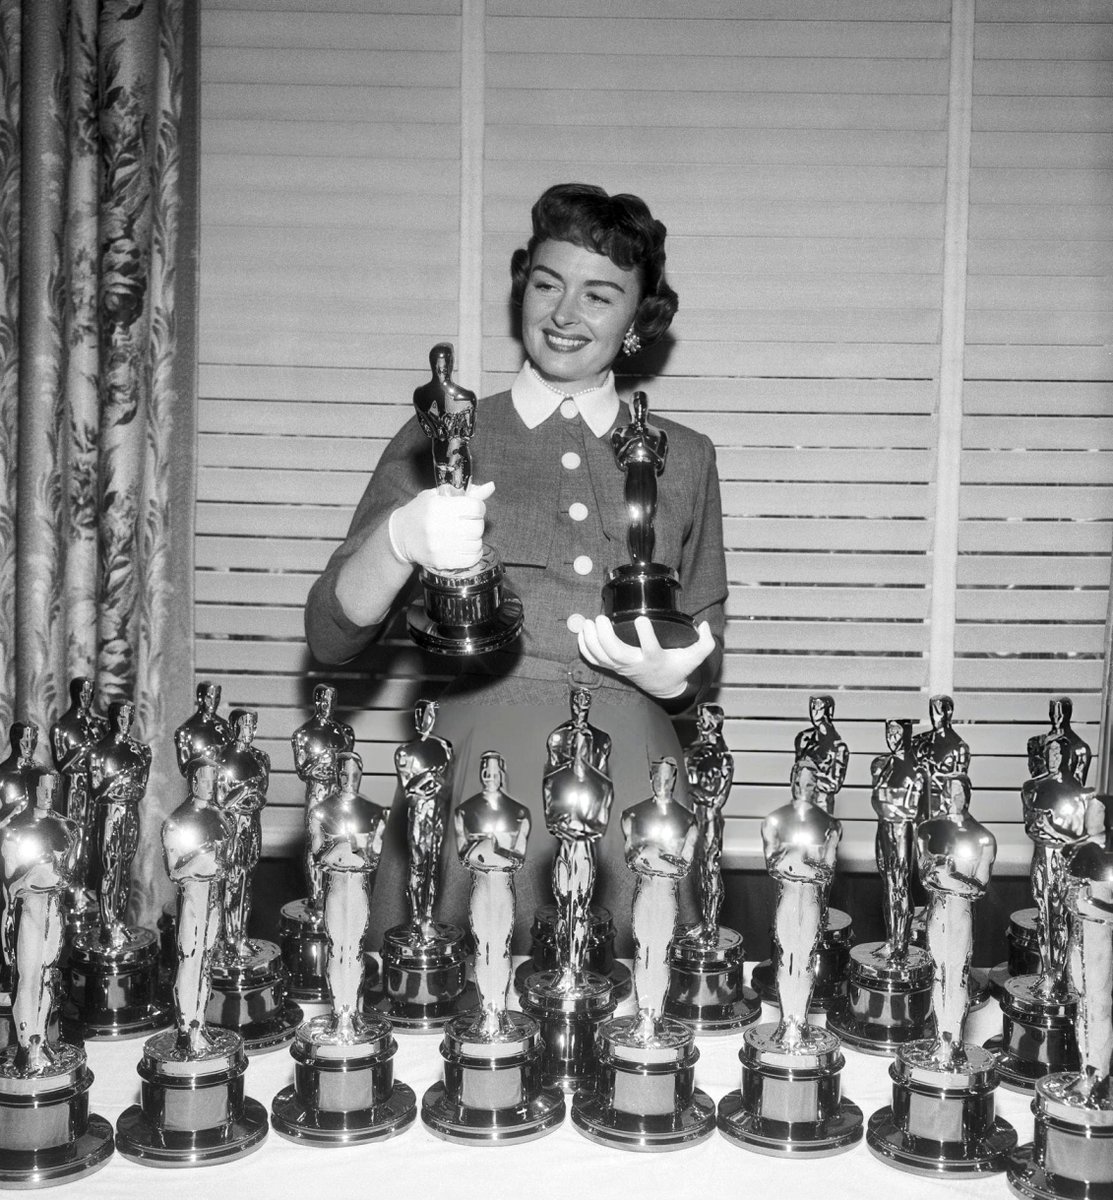 Donna Reed, who won an Oscar in 1954 for From Here to Eternity, shown here examining the Oscars that were presented to the winners at the 27th Academy Awards held on March 30, 1955. Reed presented Edmond O'Brien his Oscar for his role in The Barefoot Contessa, March 25, 1955.